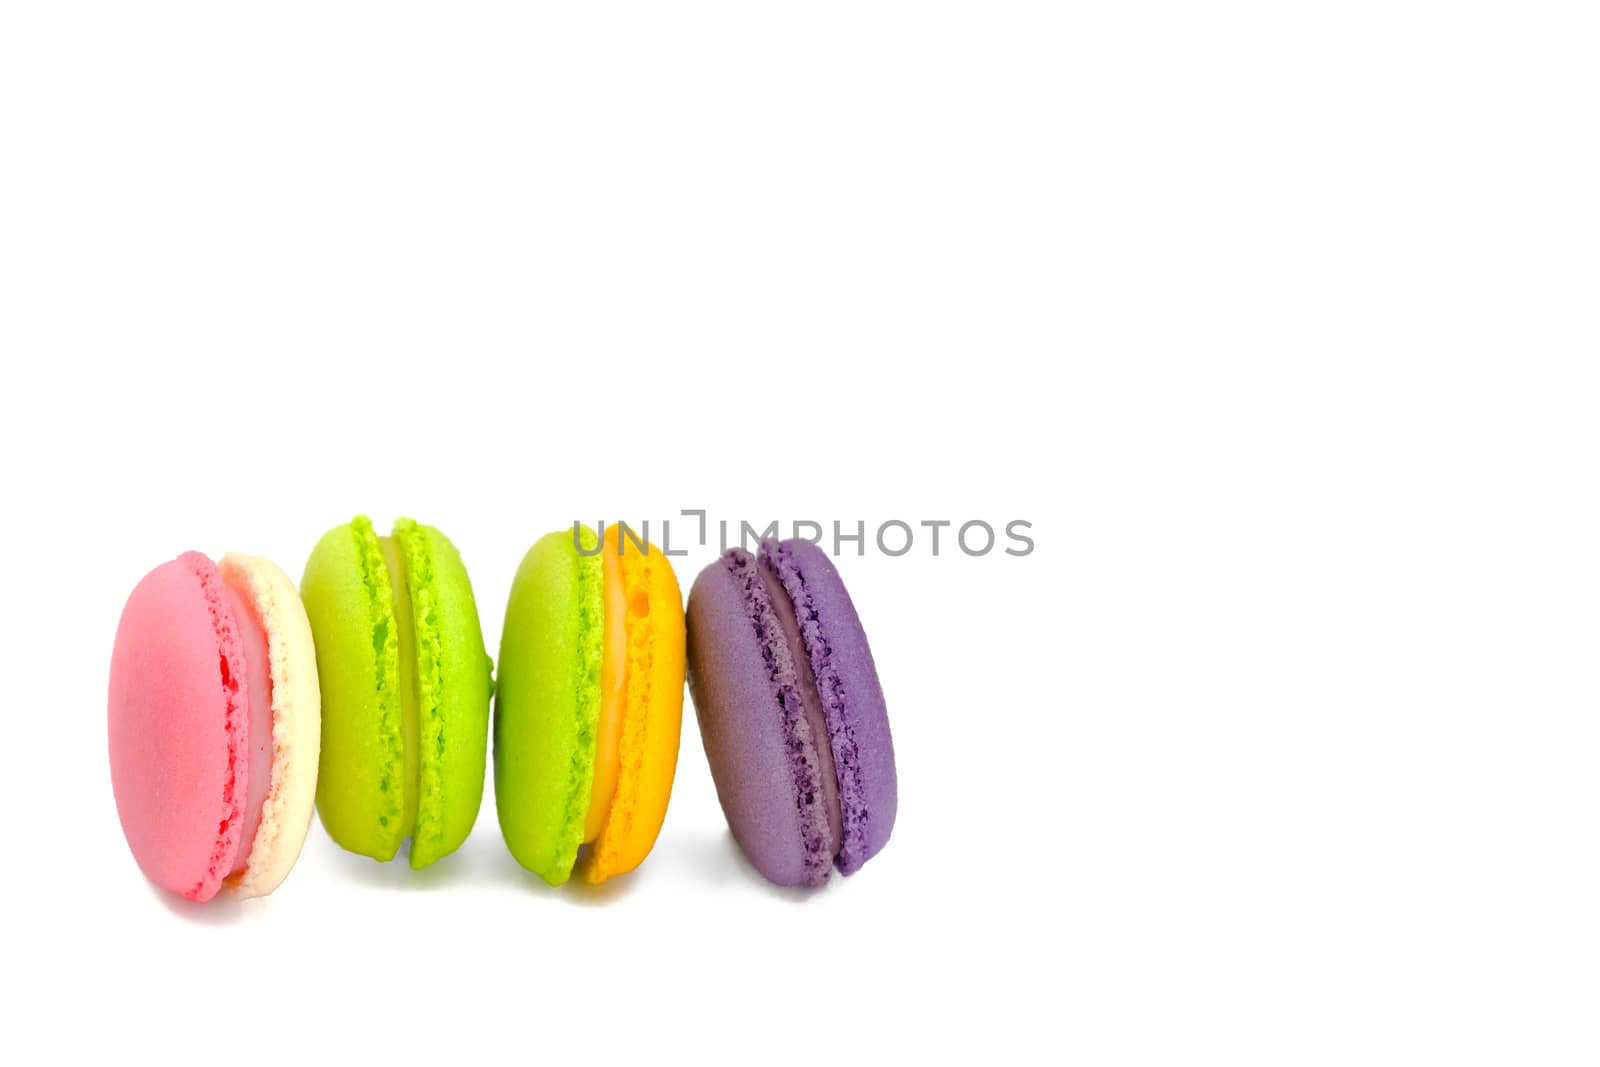 assortments of colorful macaroons, isolated on white background